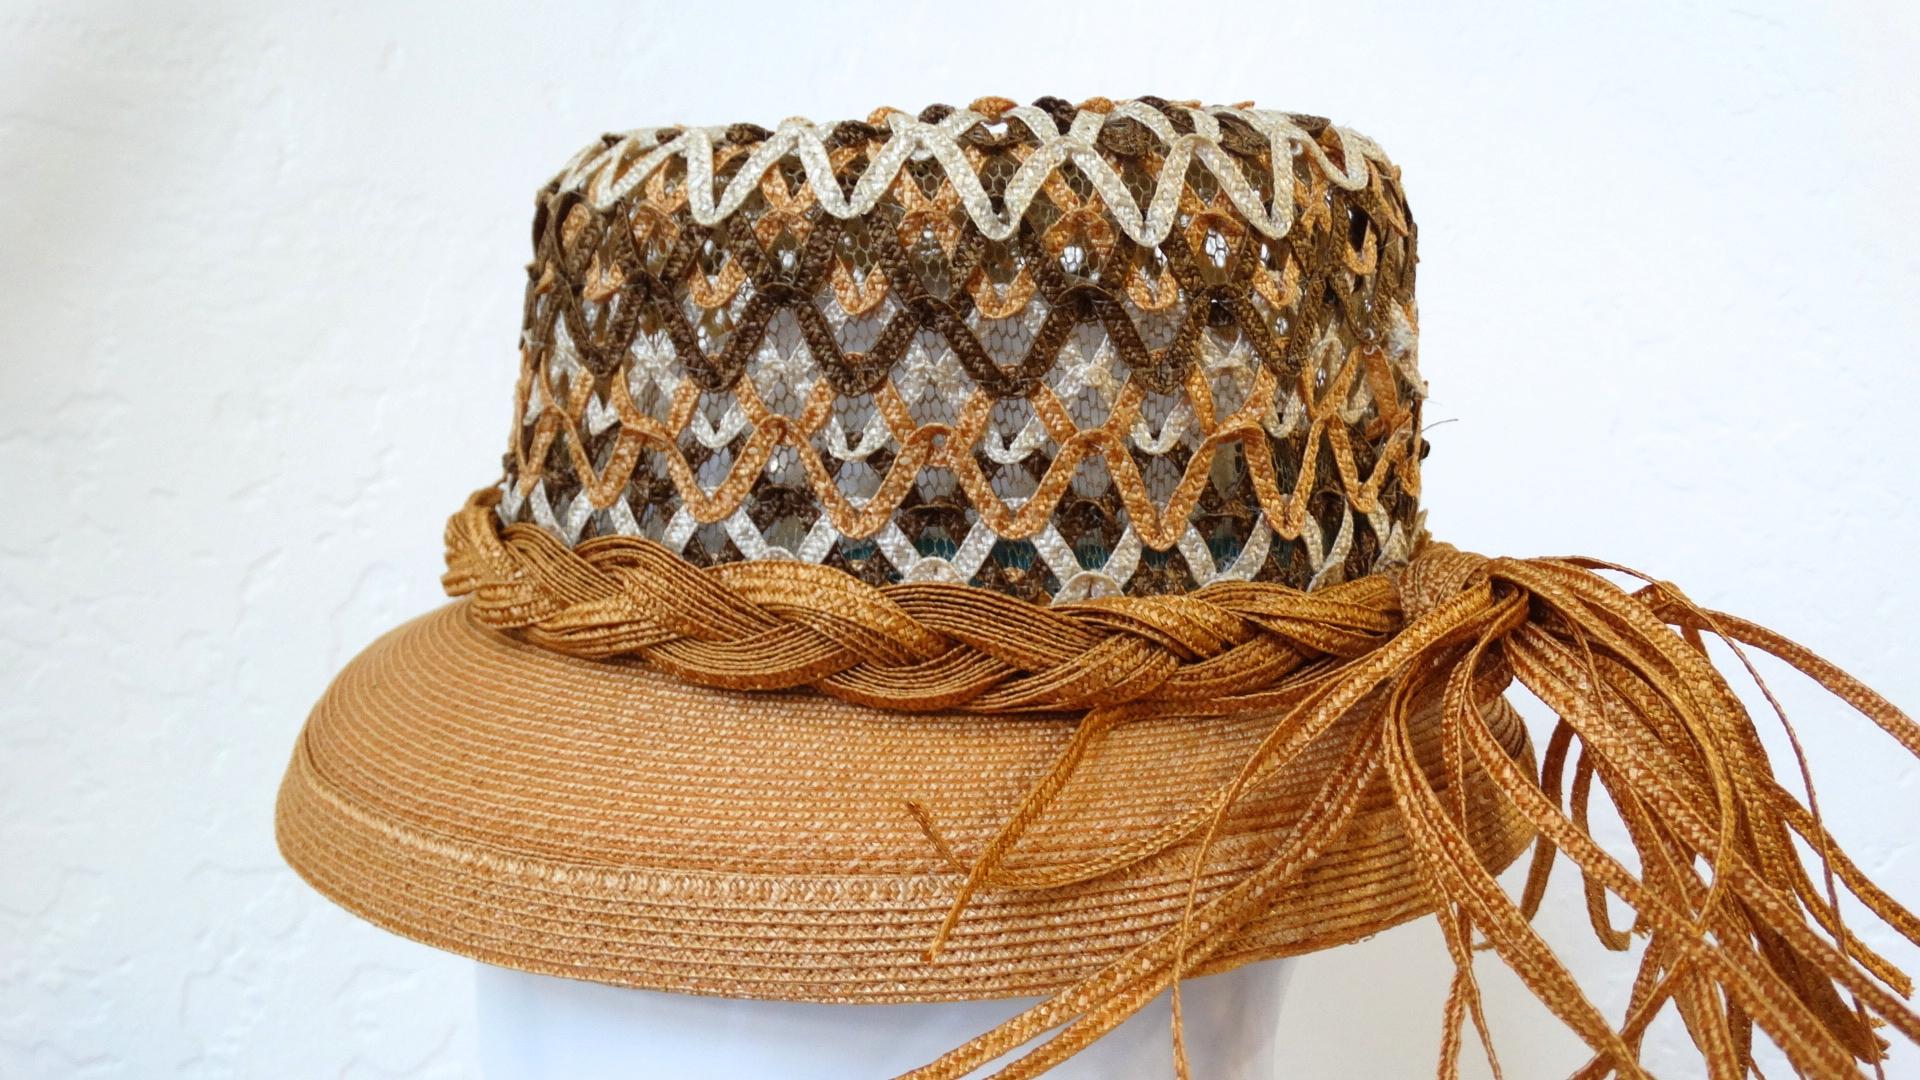 Yves Saint Laurent Woven Straw Boater Hat, 1960s  In Excellent Condition For Sale In Scottsdale, AZ